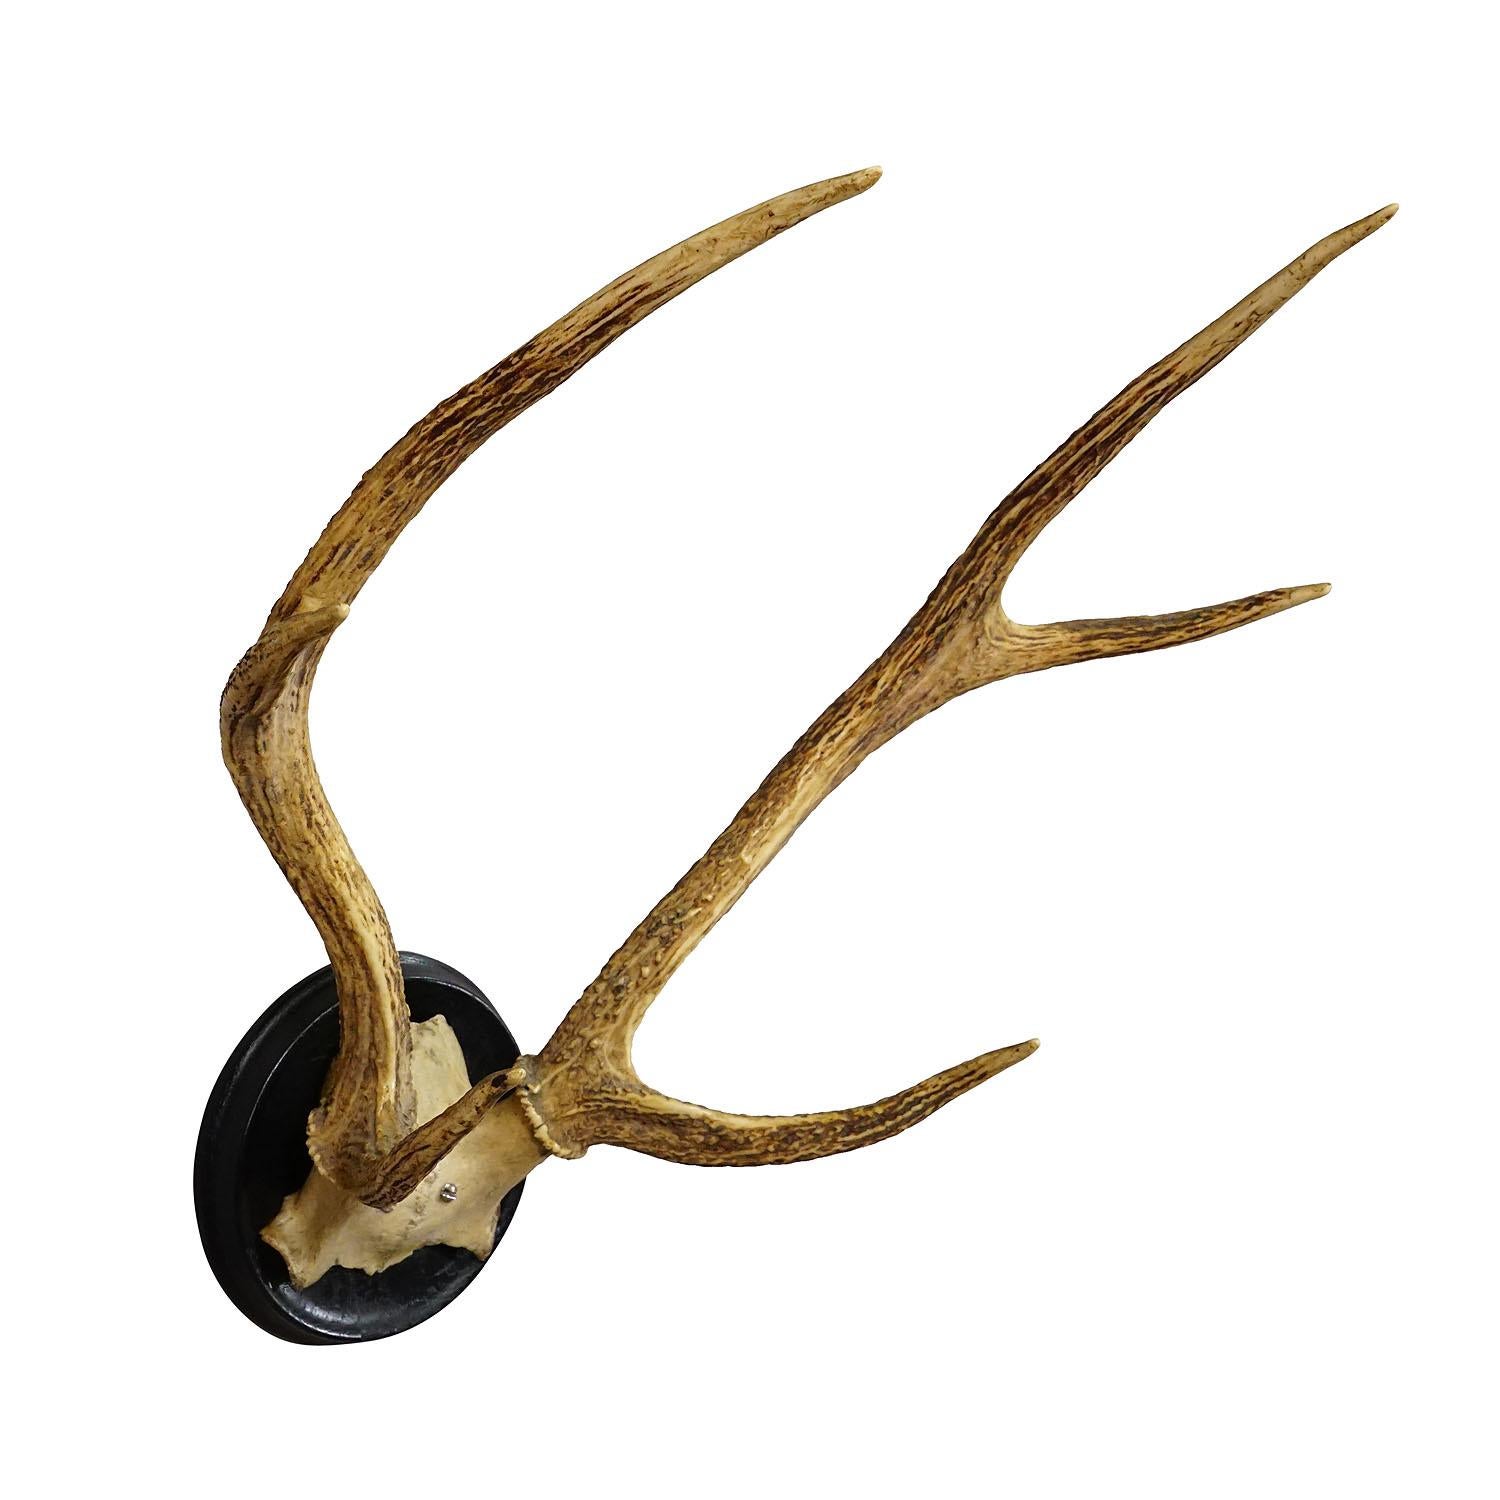 Antique Black Forest 6 Pointer Sika Deer Trophy on Wooden Plaque ca. 1900s

A great antique sika deer (Cervus nippon) trophy from the Black Forest shot in Germany around 1900. The large antlers are mounted on a turned wall plaque with black